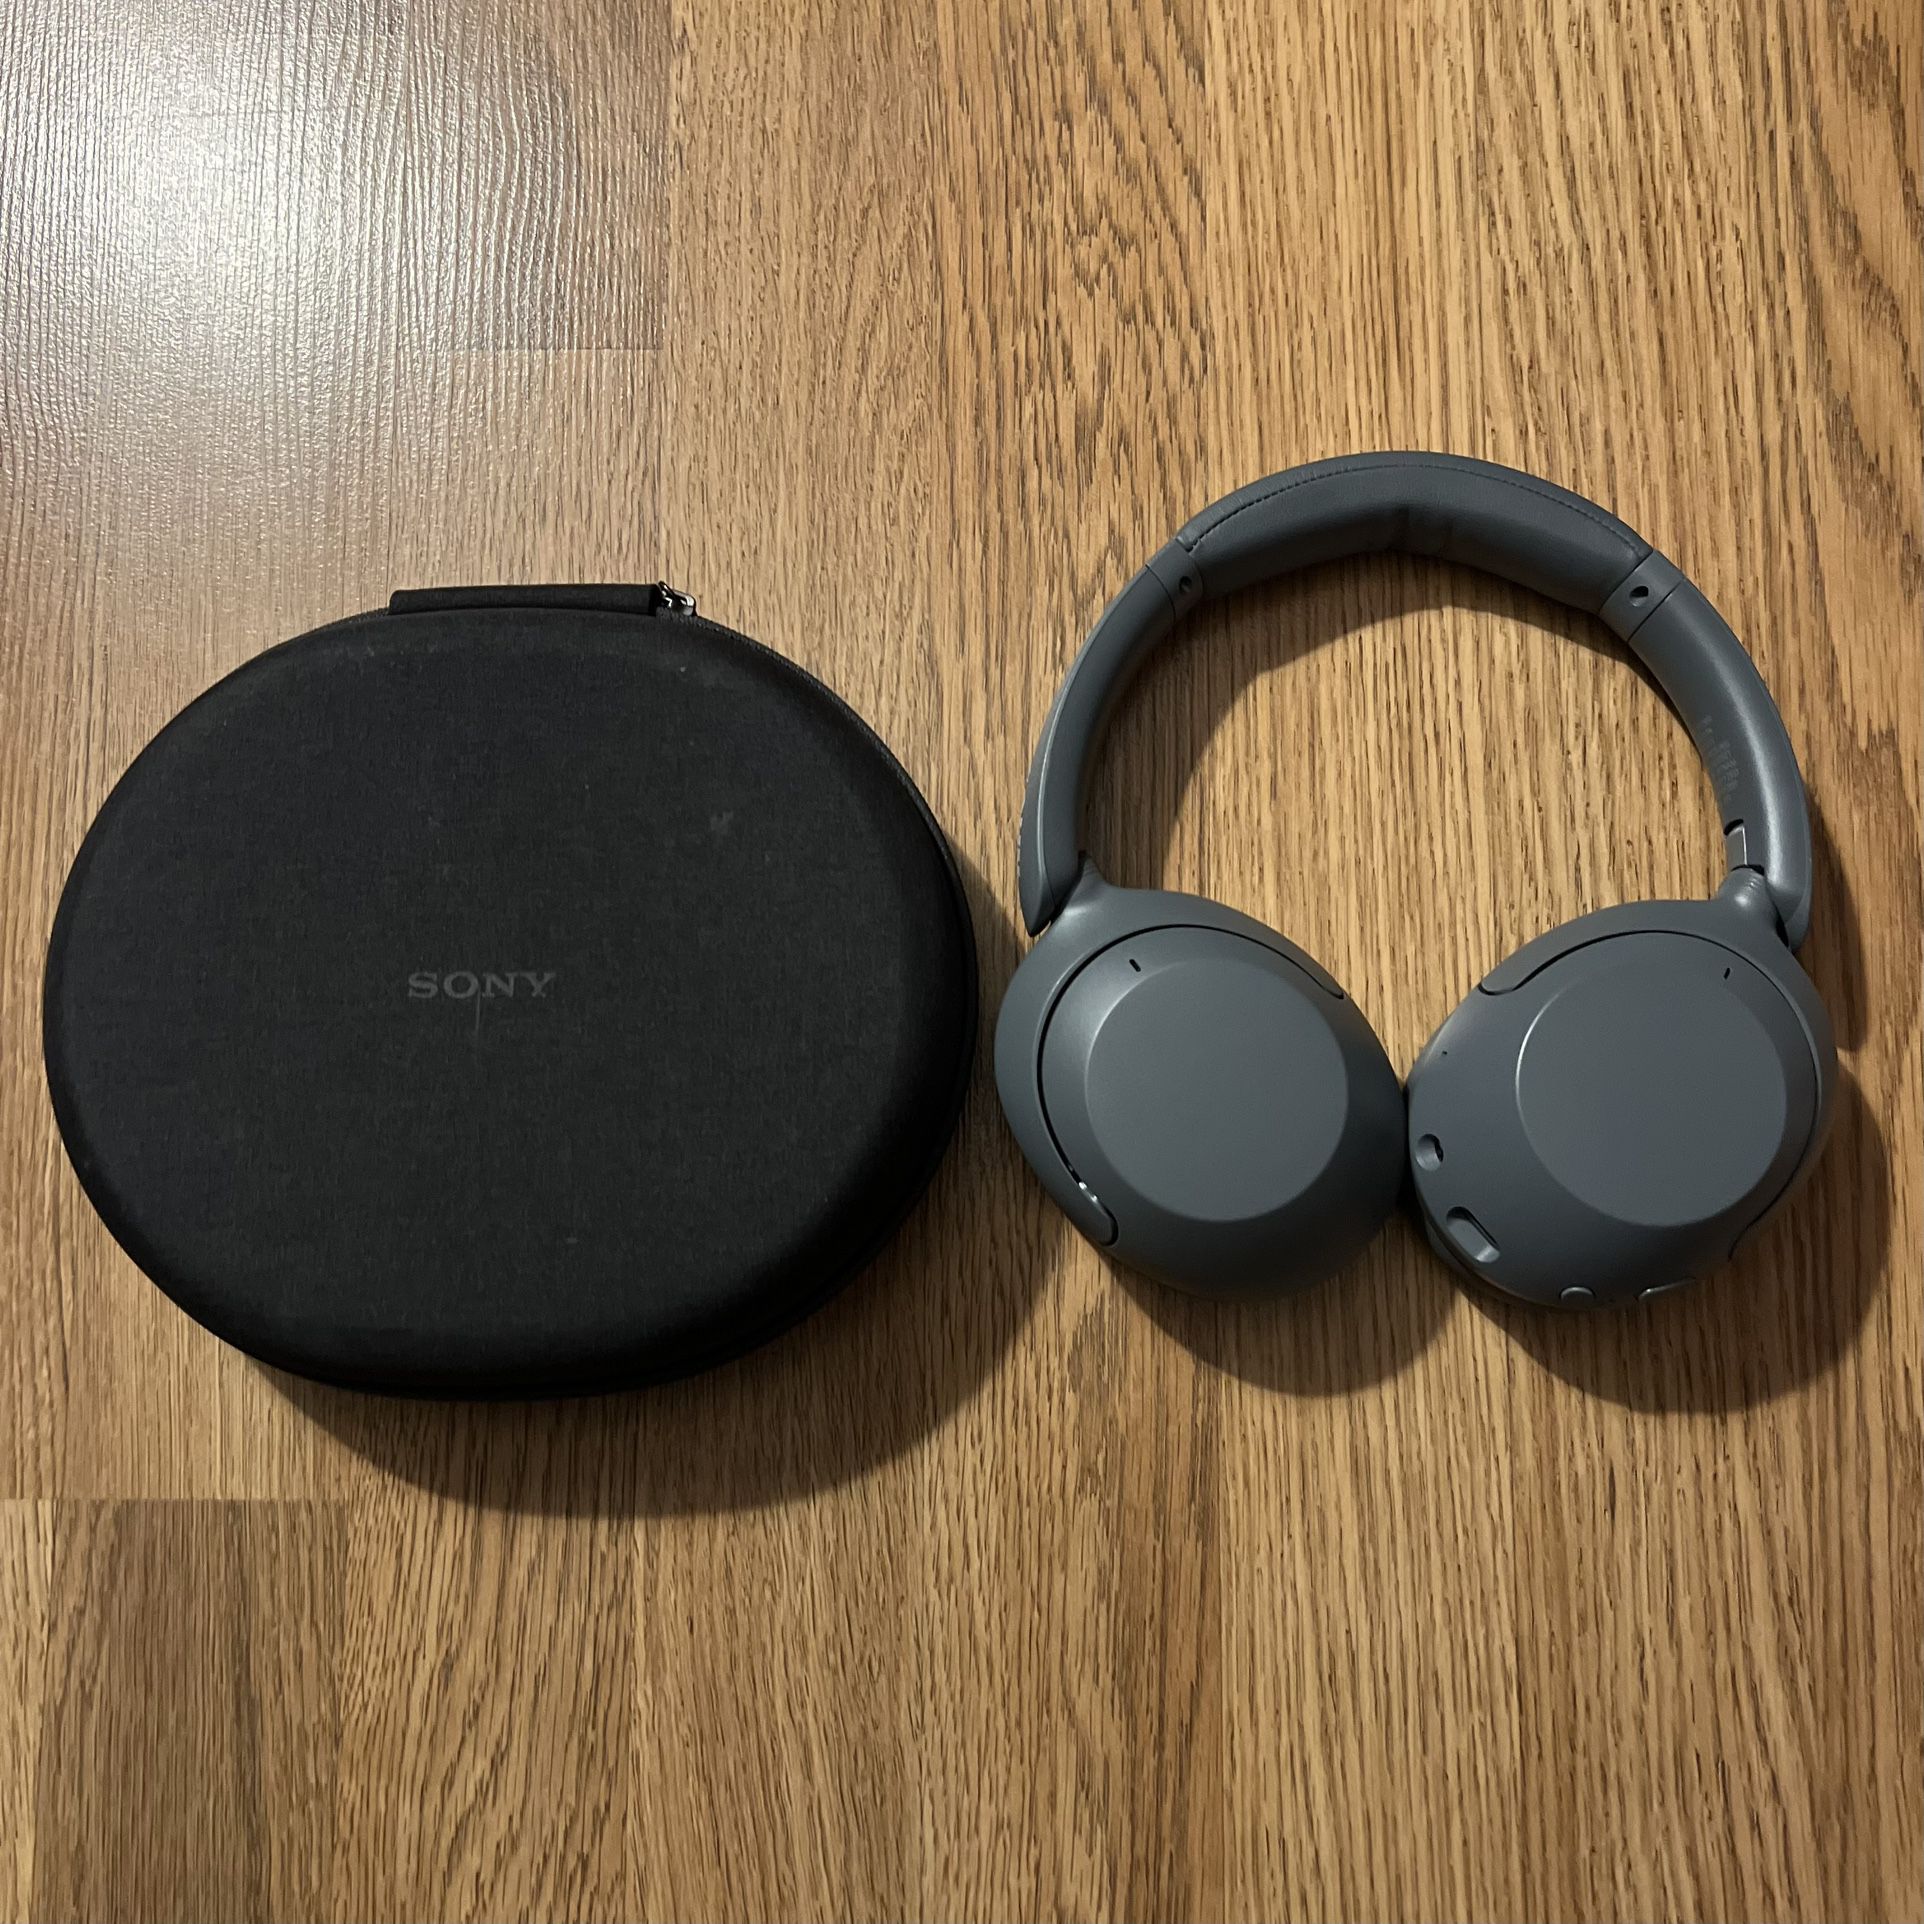 Sony Bass boosted headphones